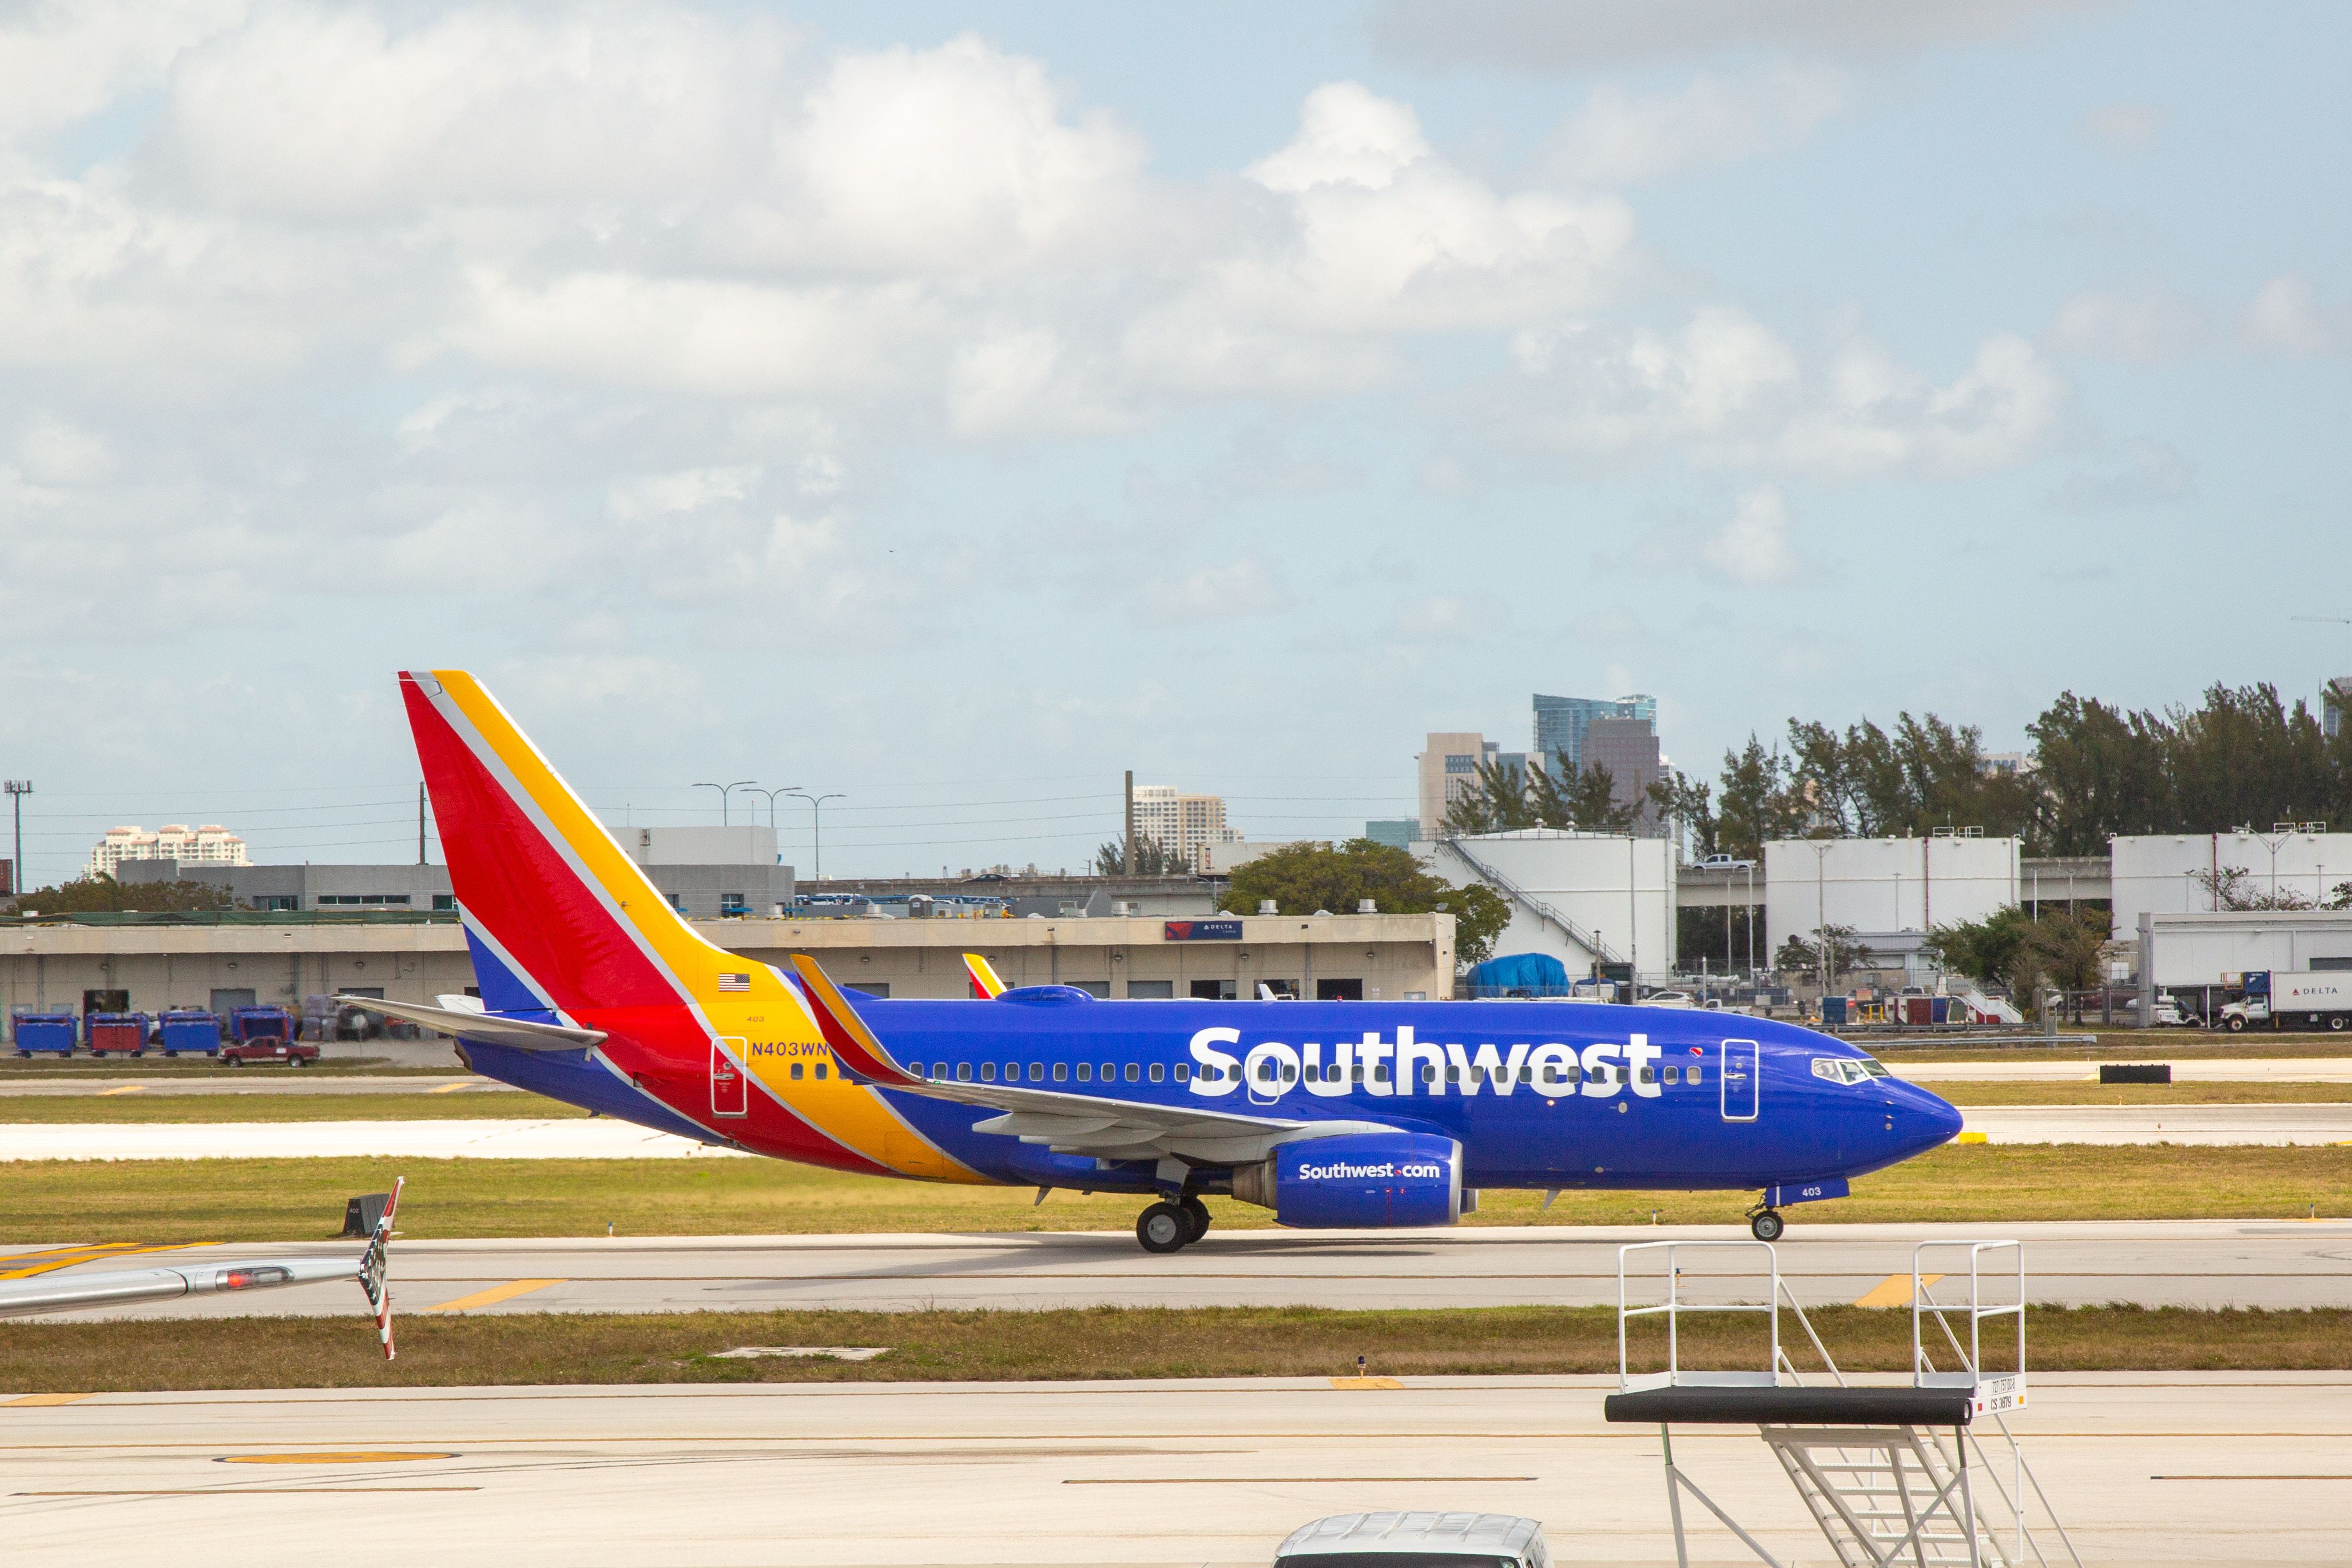 Southwest Airlines Boeing 737-7H4 at Fort Lauderdale-Hollywood International Airport.